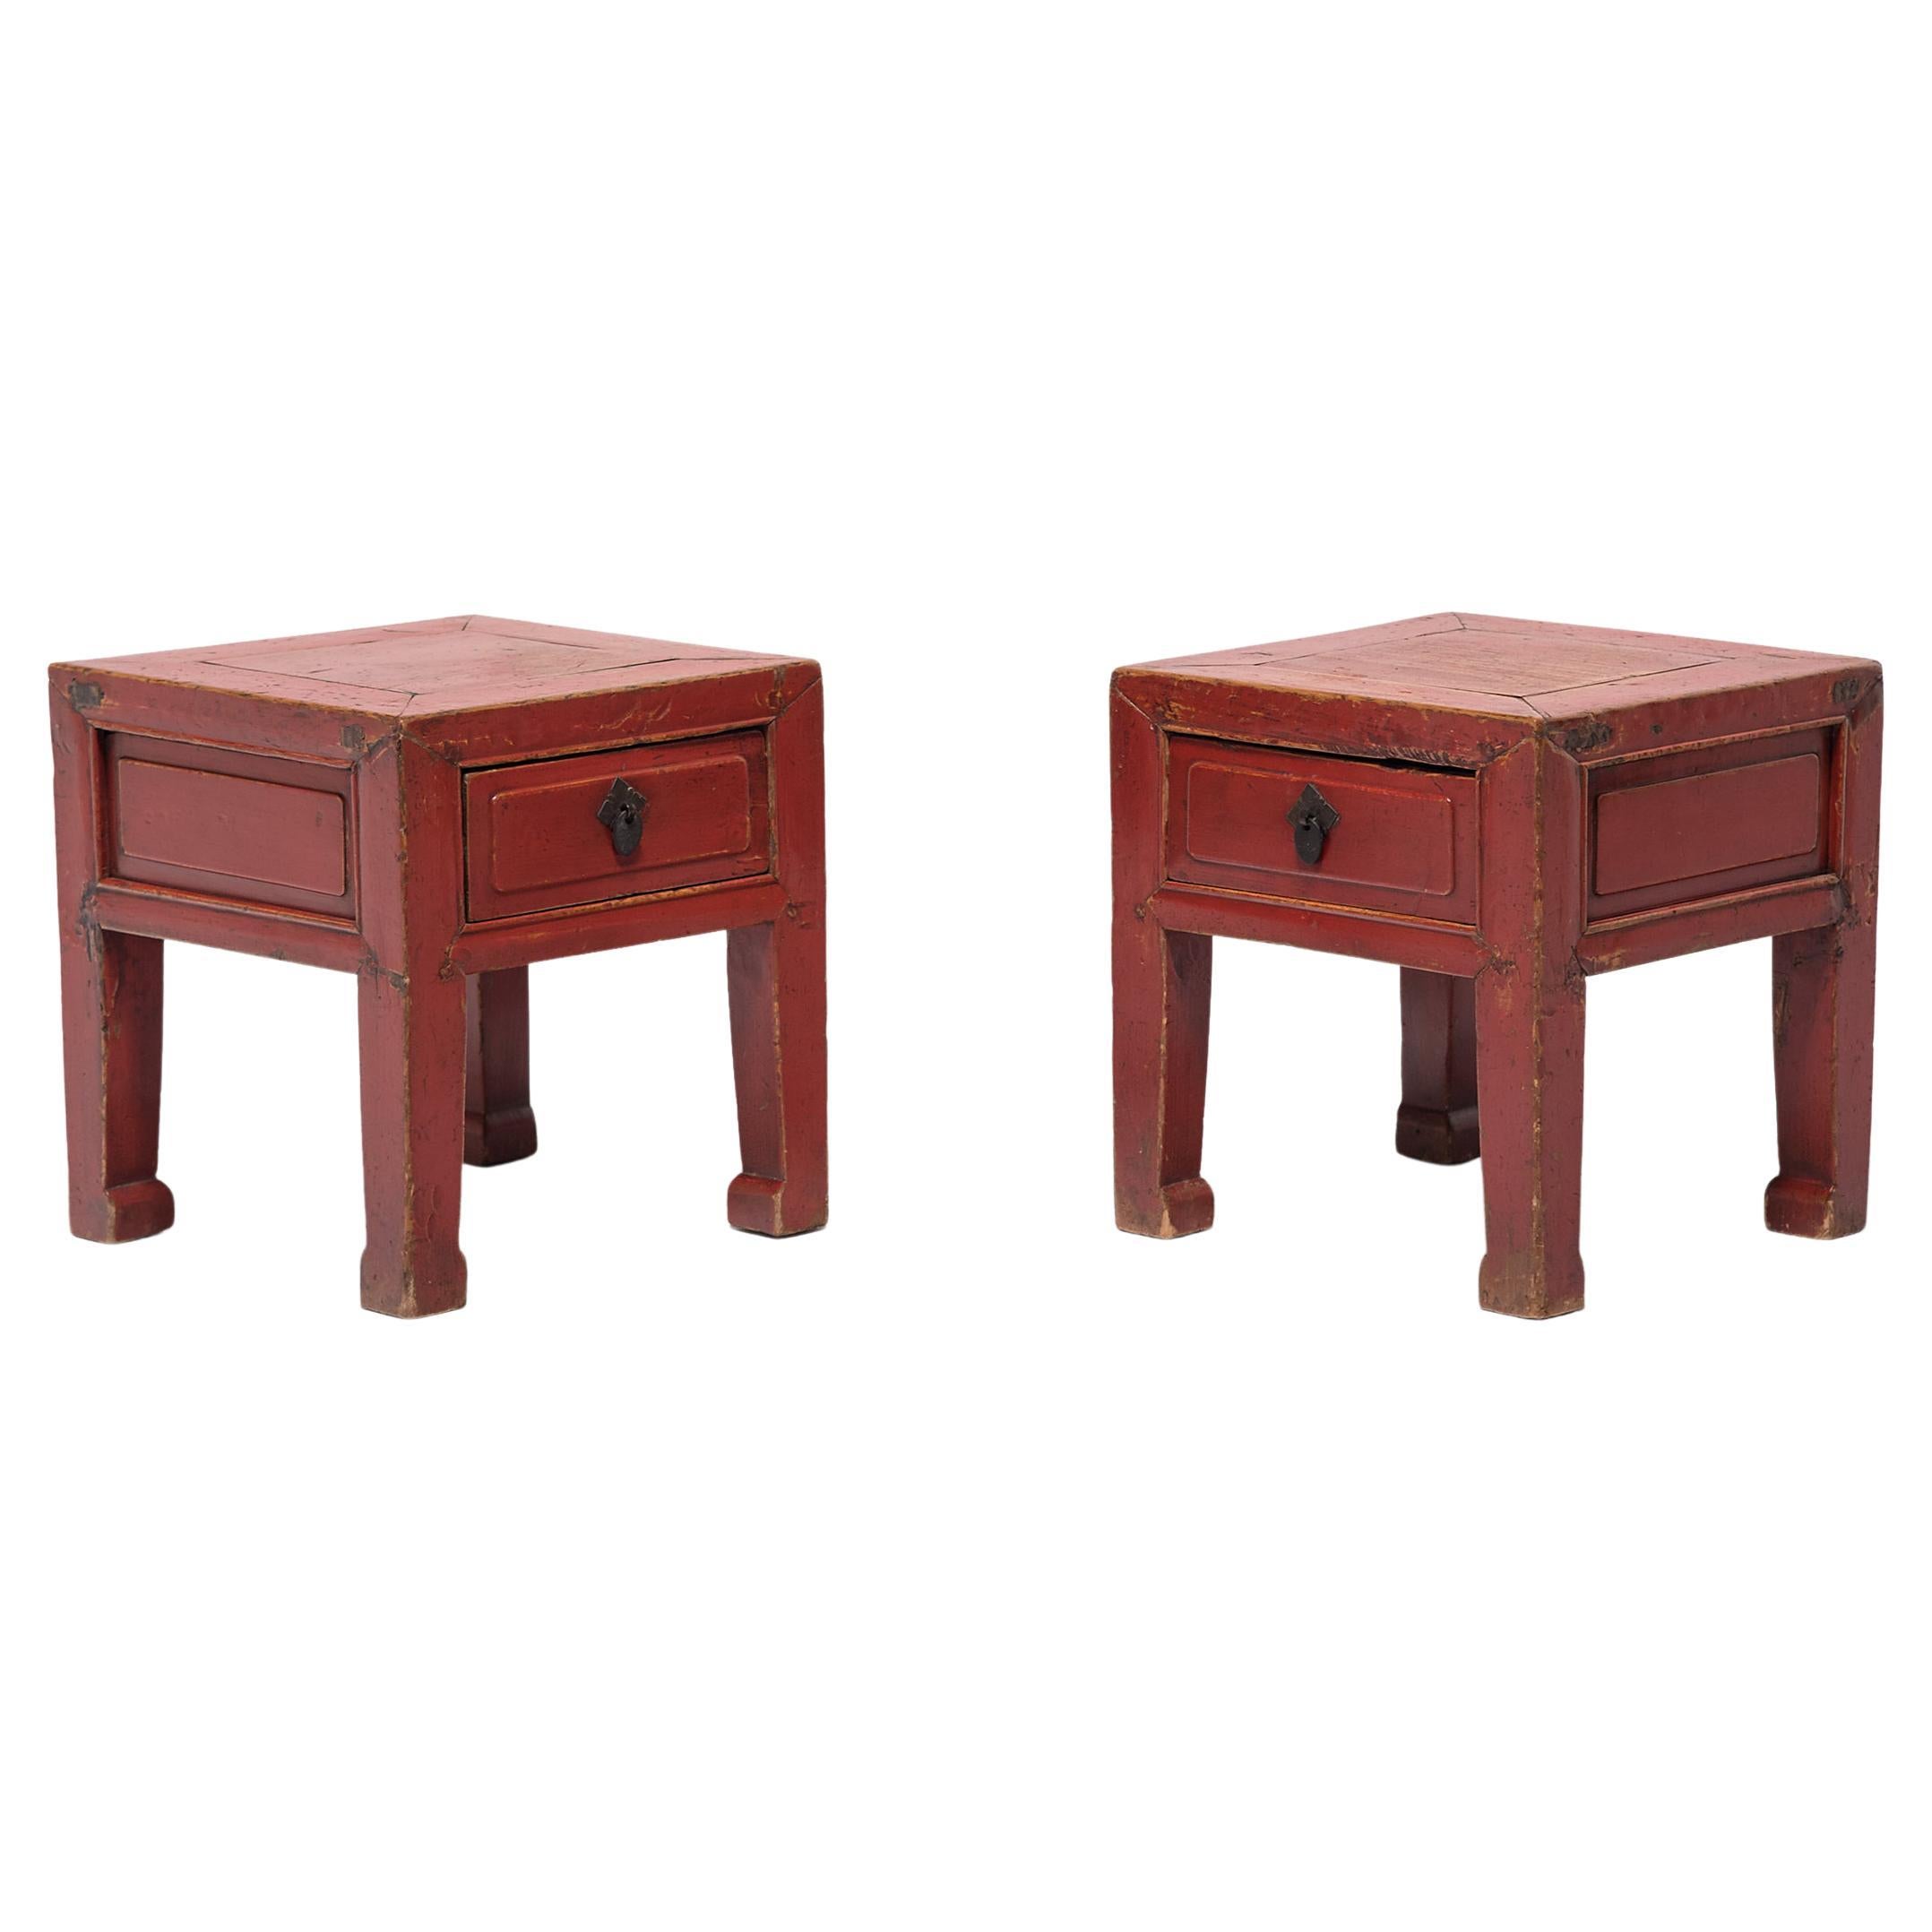 Pair of Chinese Petite Red Lacquer Square Stools, c. 1850